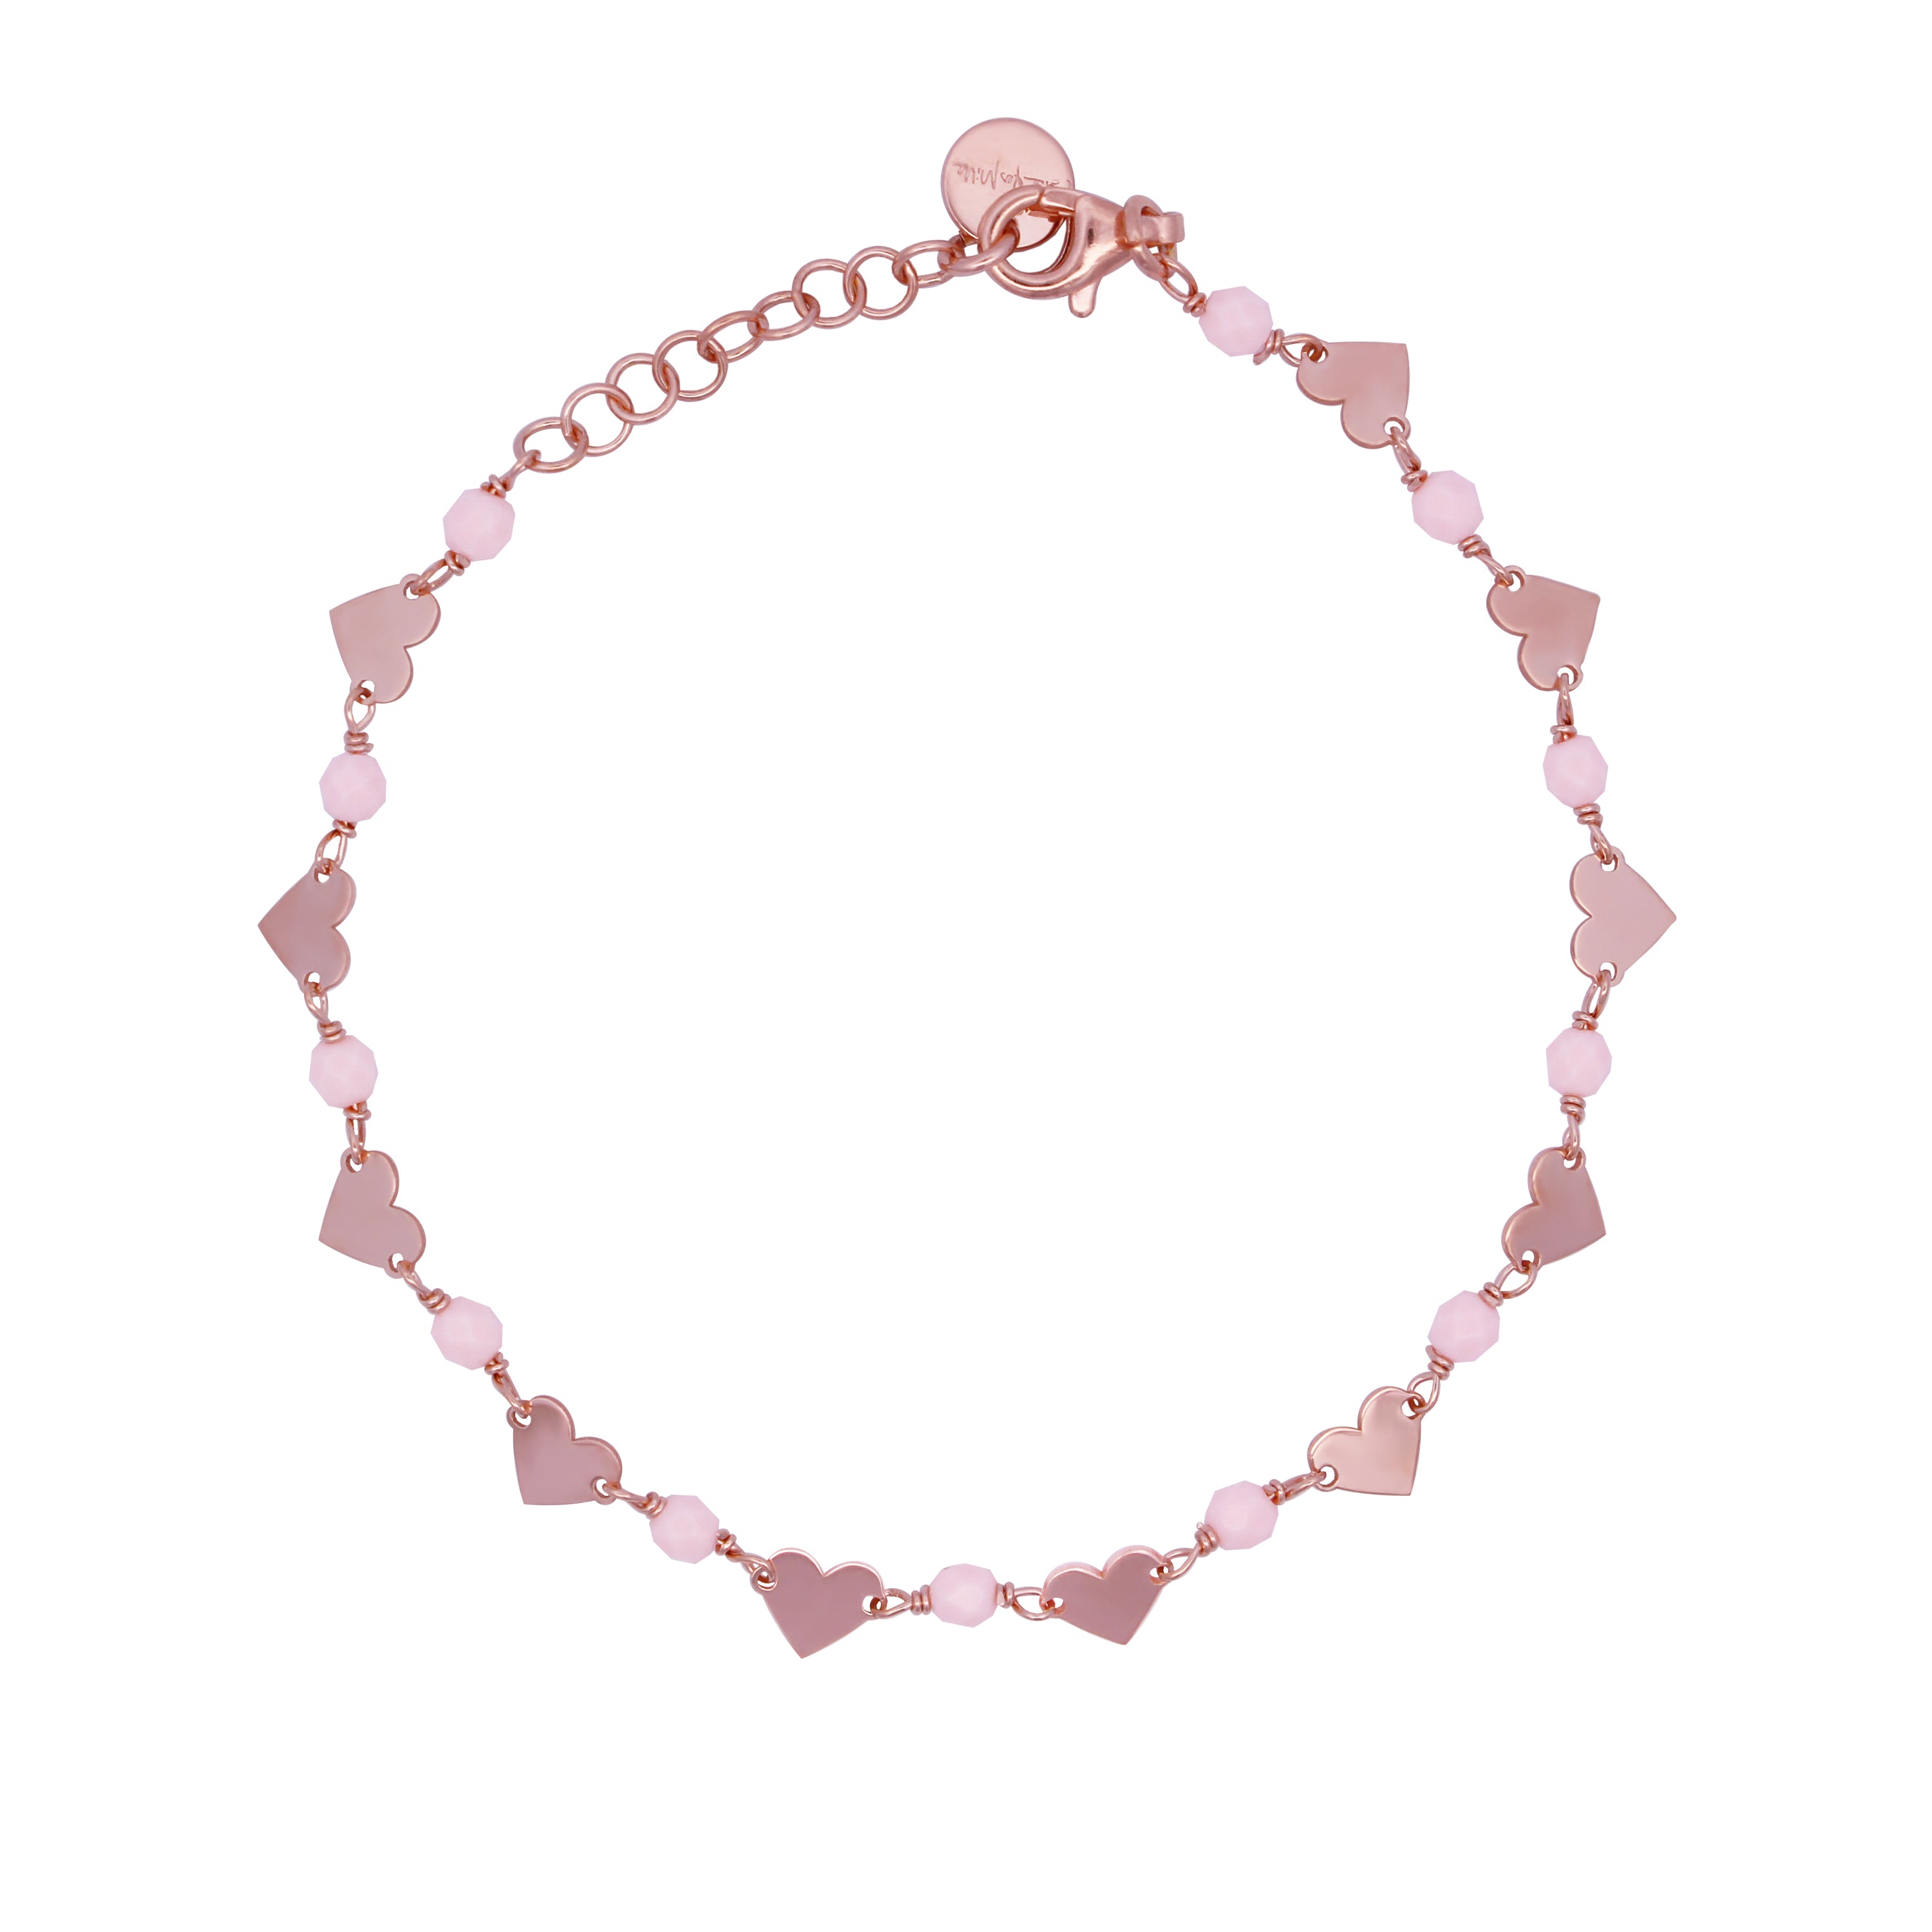 Chained bracelet Hearts Pink stones Adult - Io&Ro